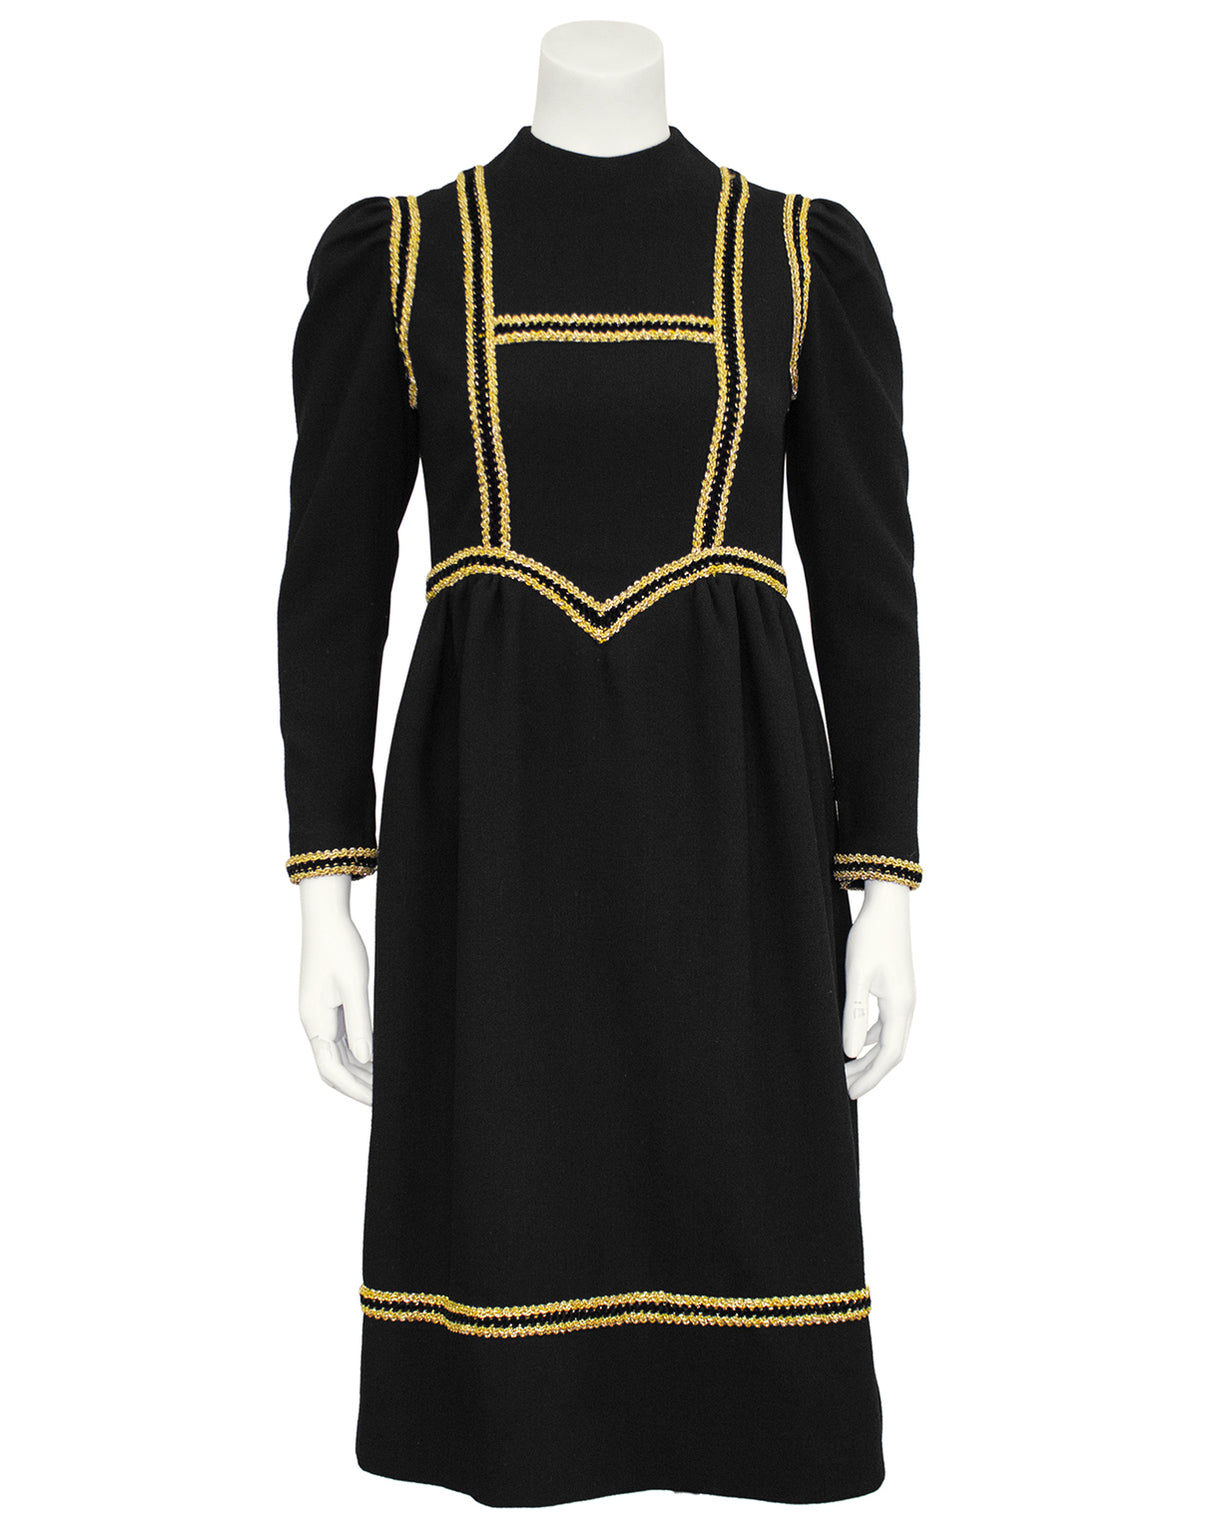 Black and Gold Dress – Vintage Couture